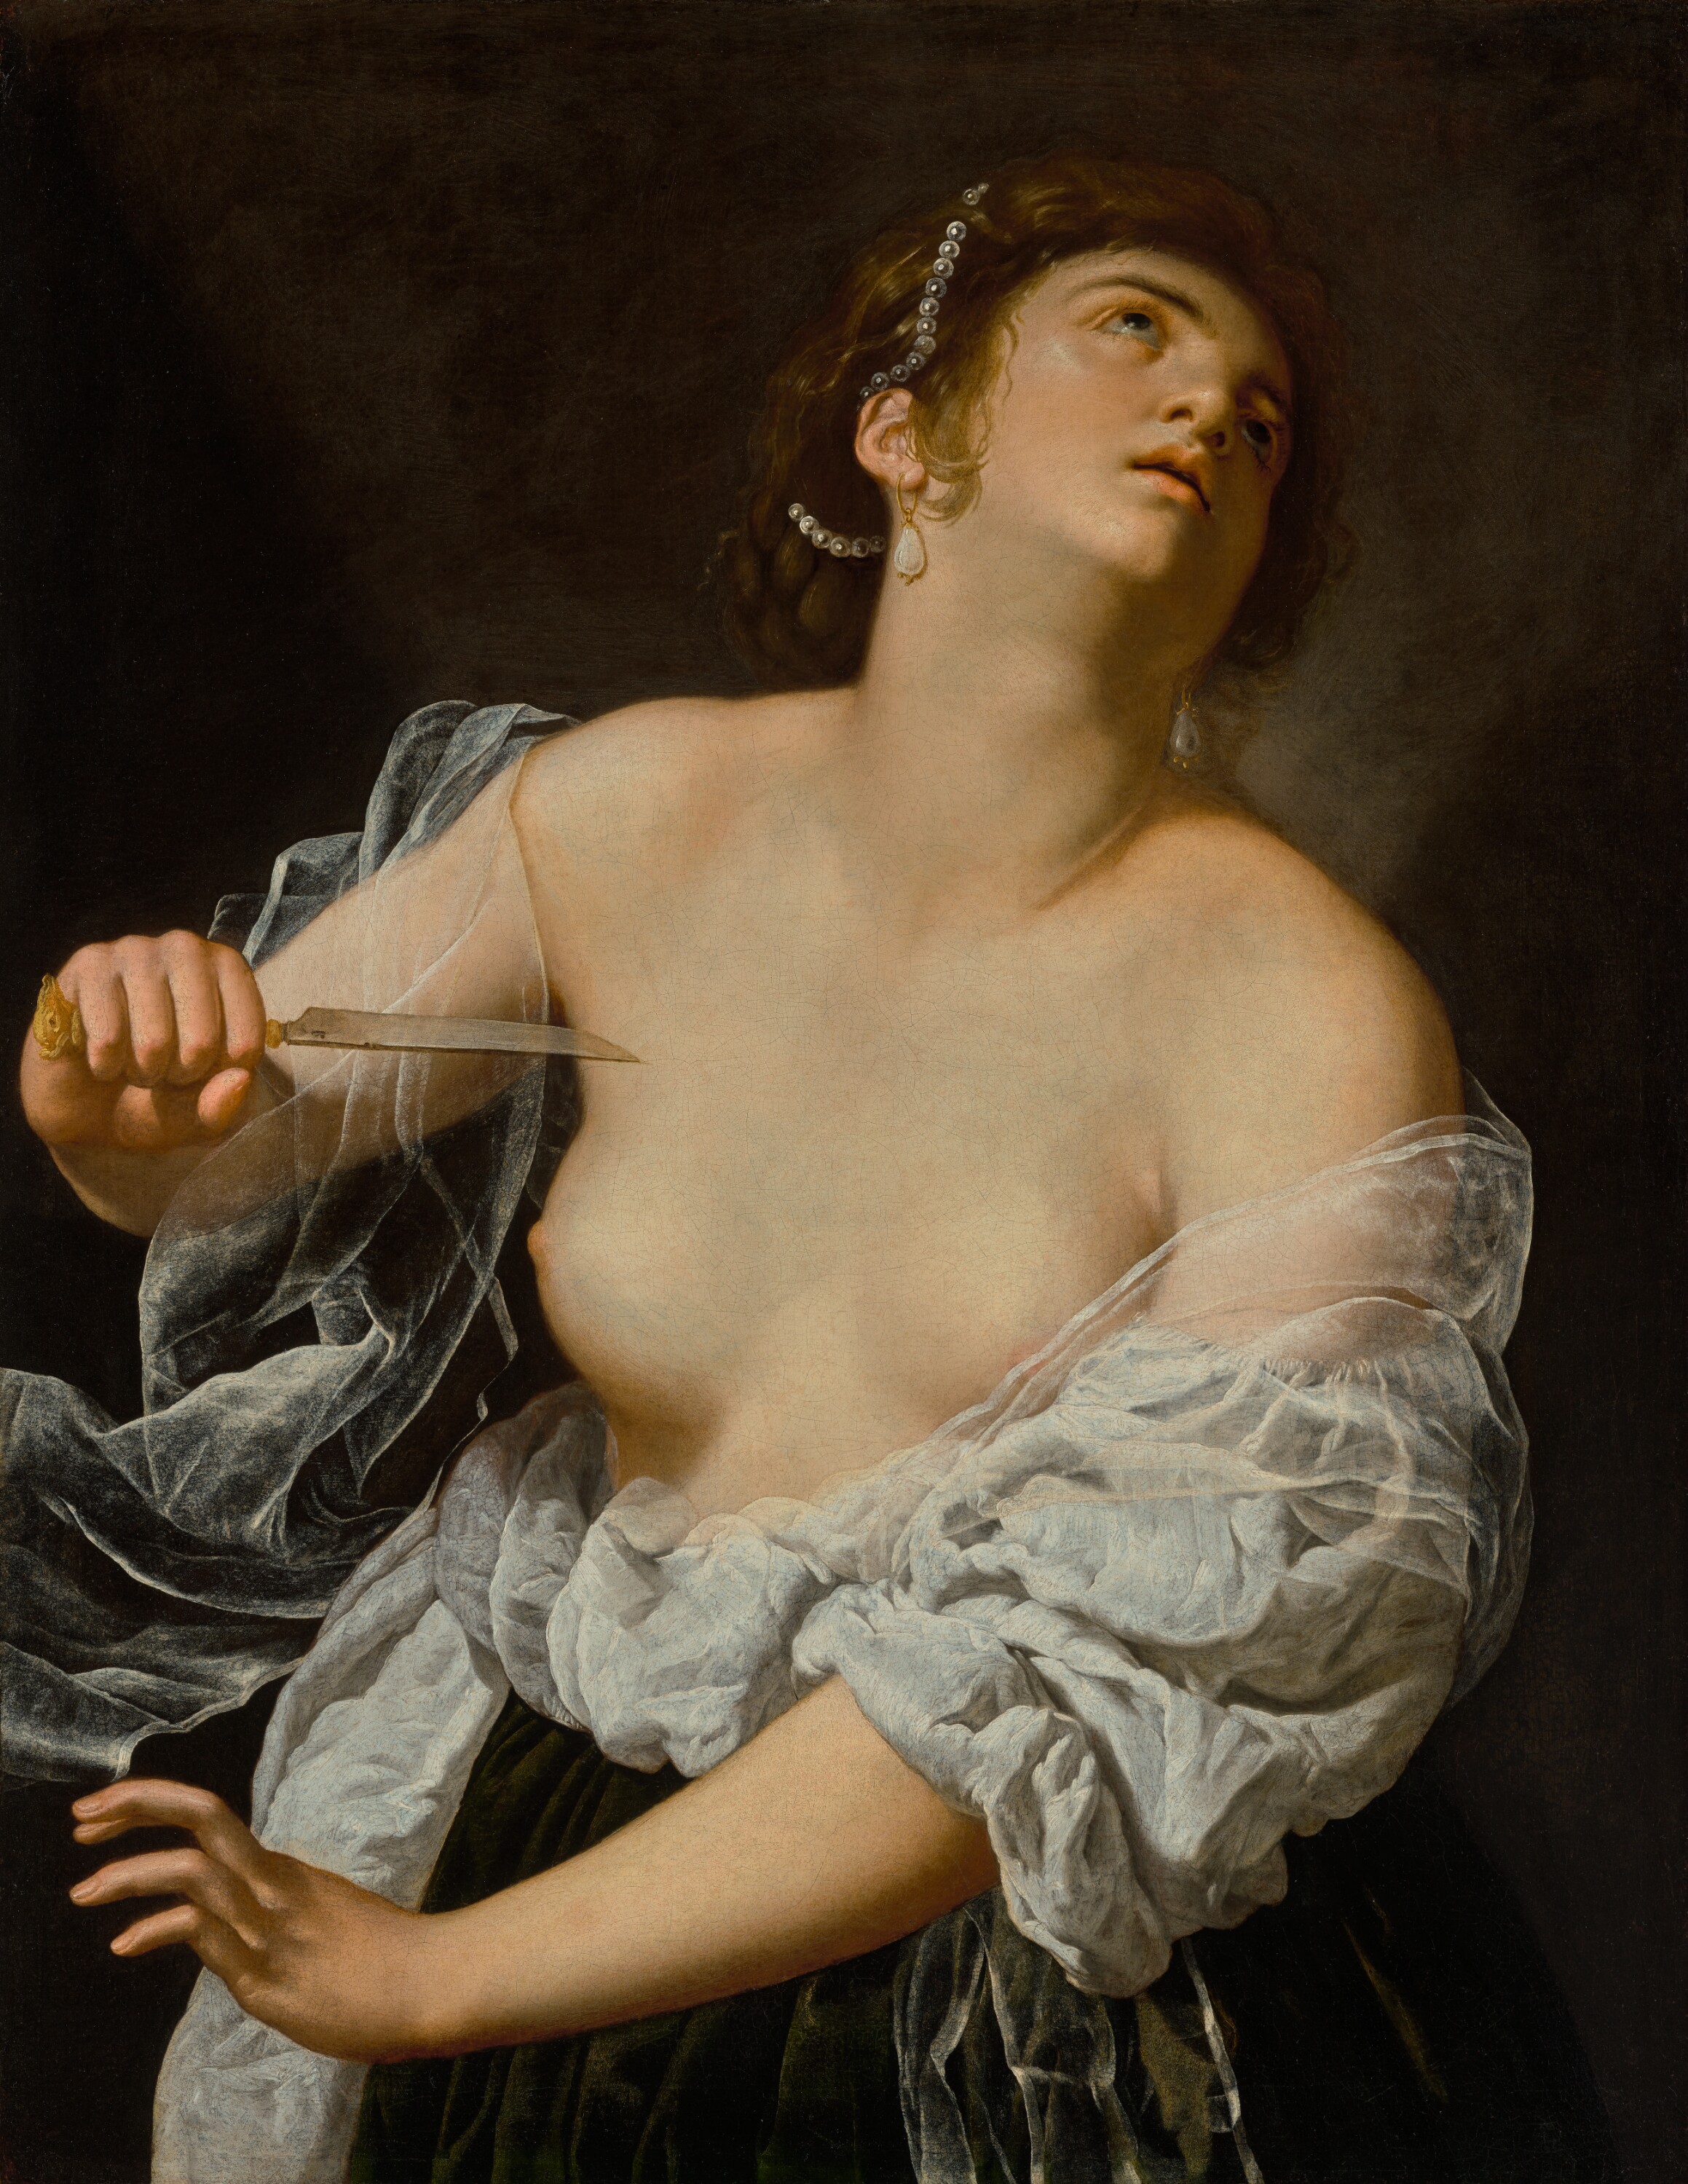 A half-length image of a woman in a diaphanous gown with both breasts bared. Her hair is pulled back from her face and adorned with pearls. She holds a knife in her right hand and aims the blade at her chest, looking up at the sky.